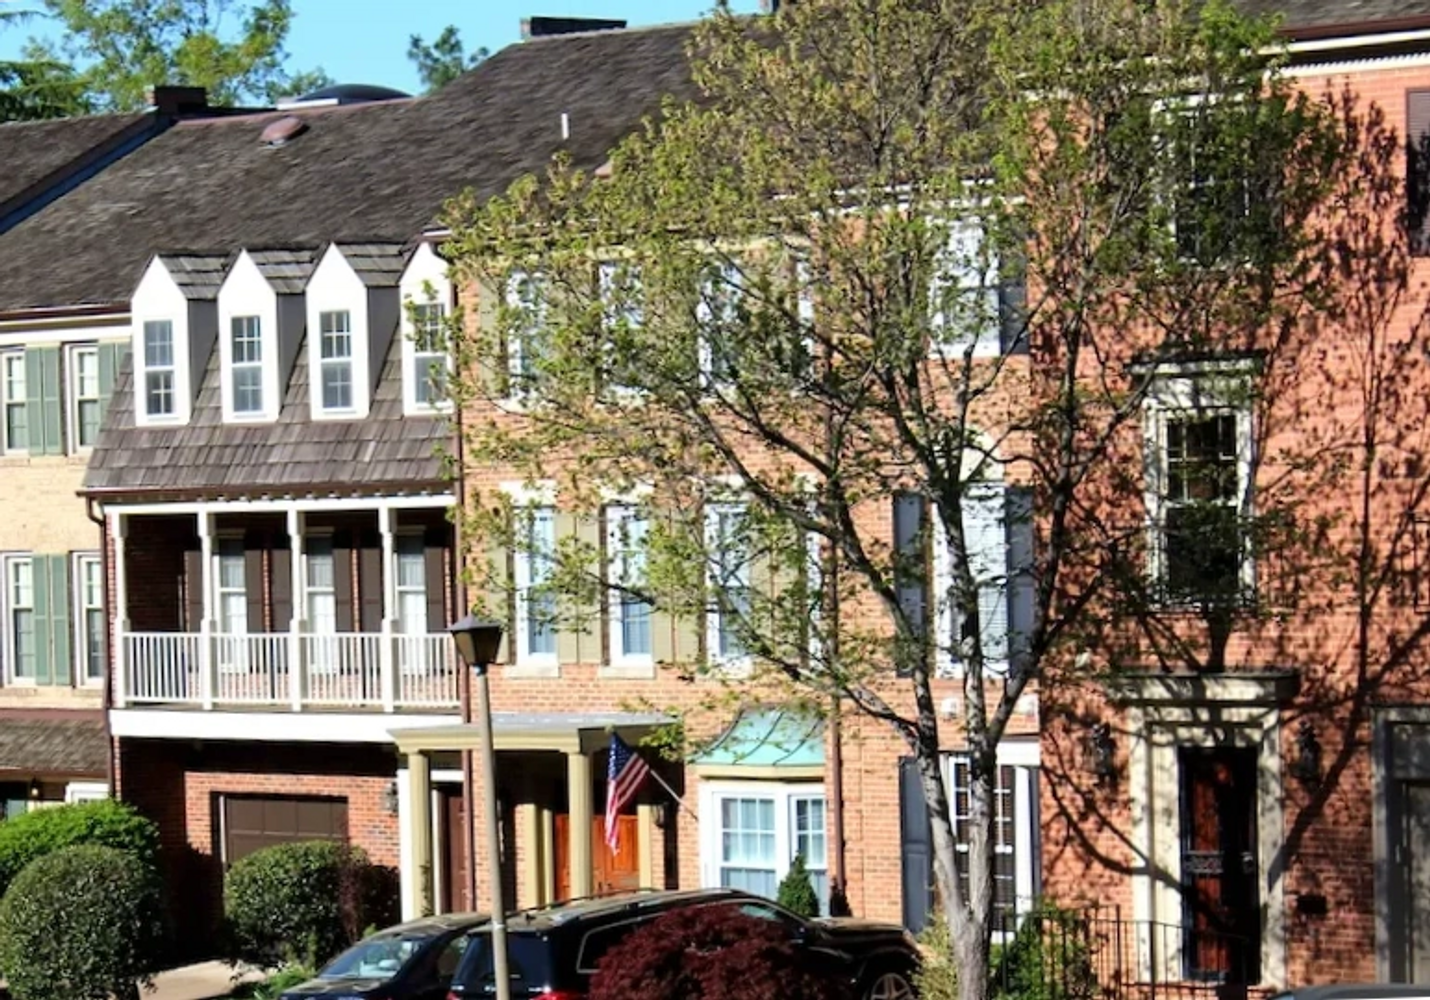 View of South Rolfe Street Townhouses